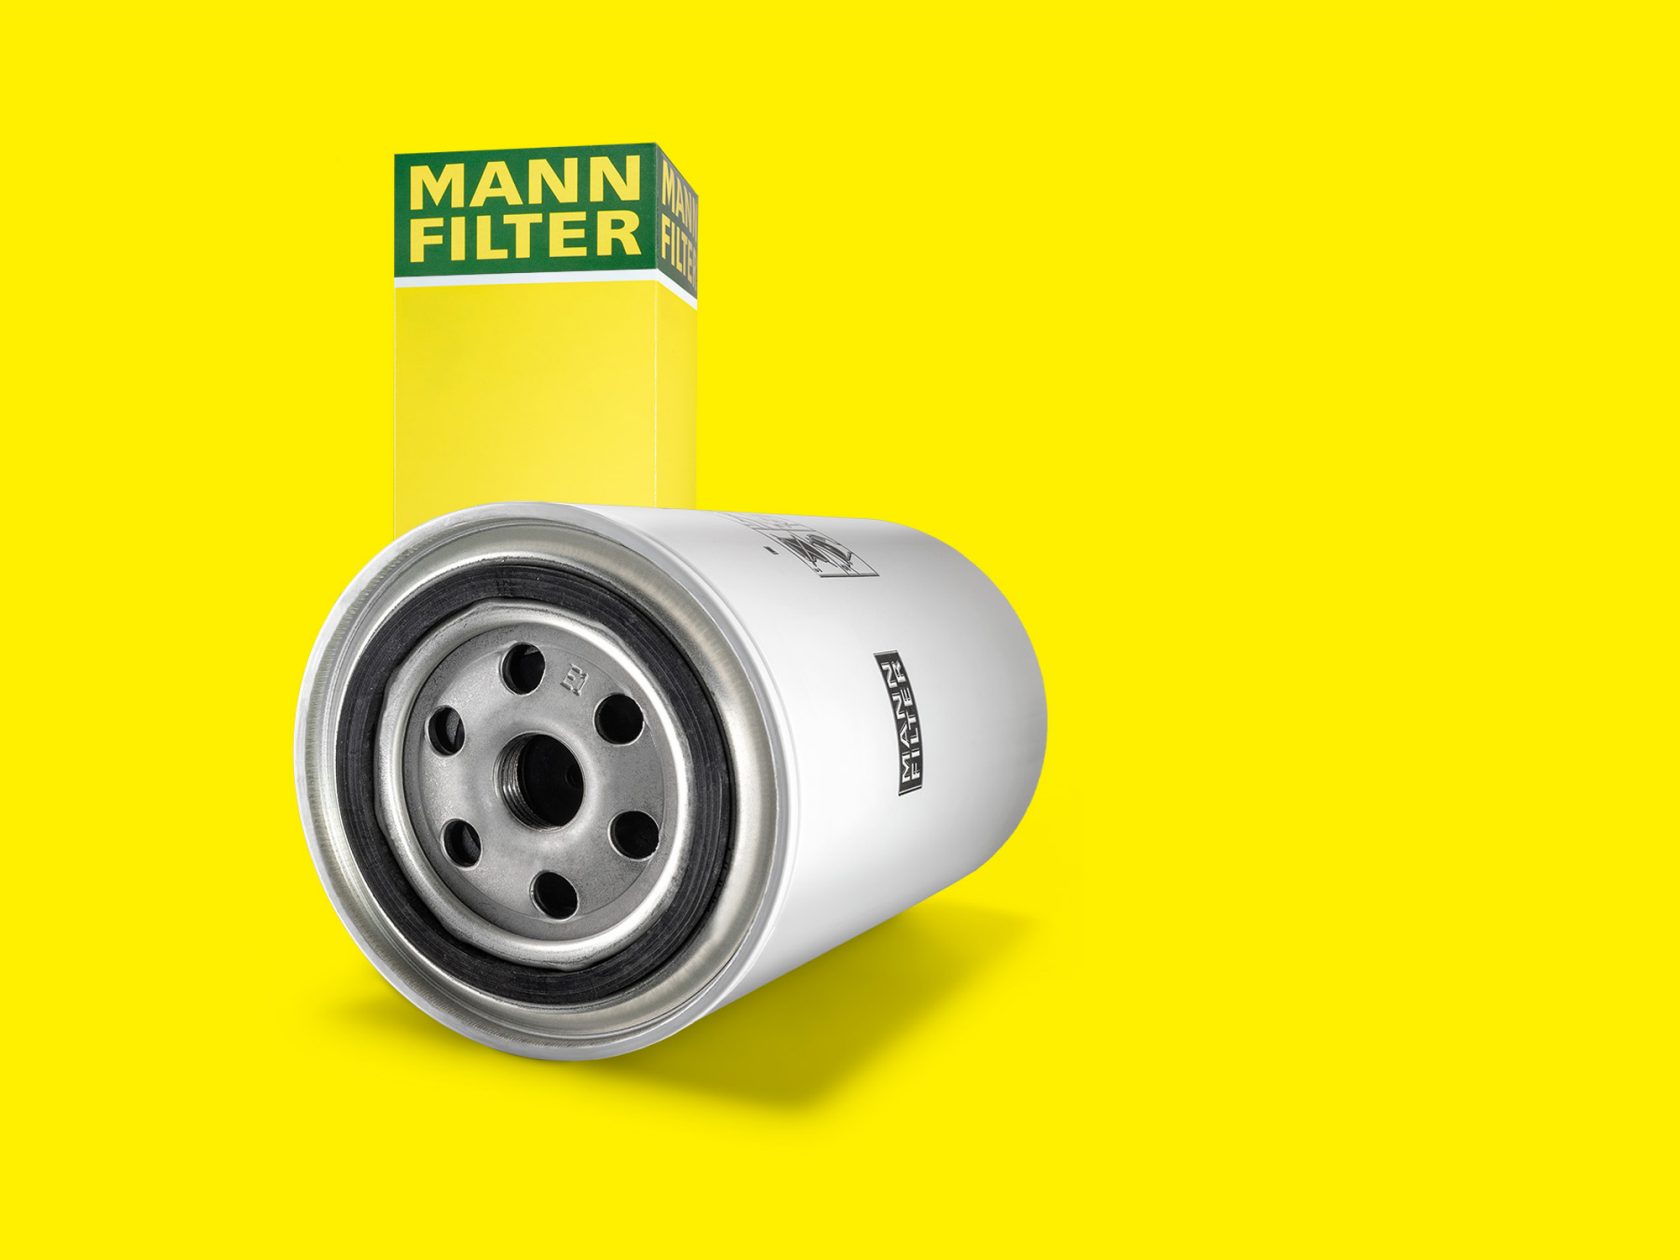 Cooling water filters from MANN-FILTER cool your vehicle’s engine efficiently